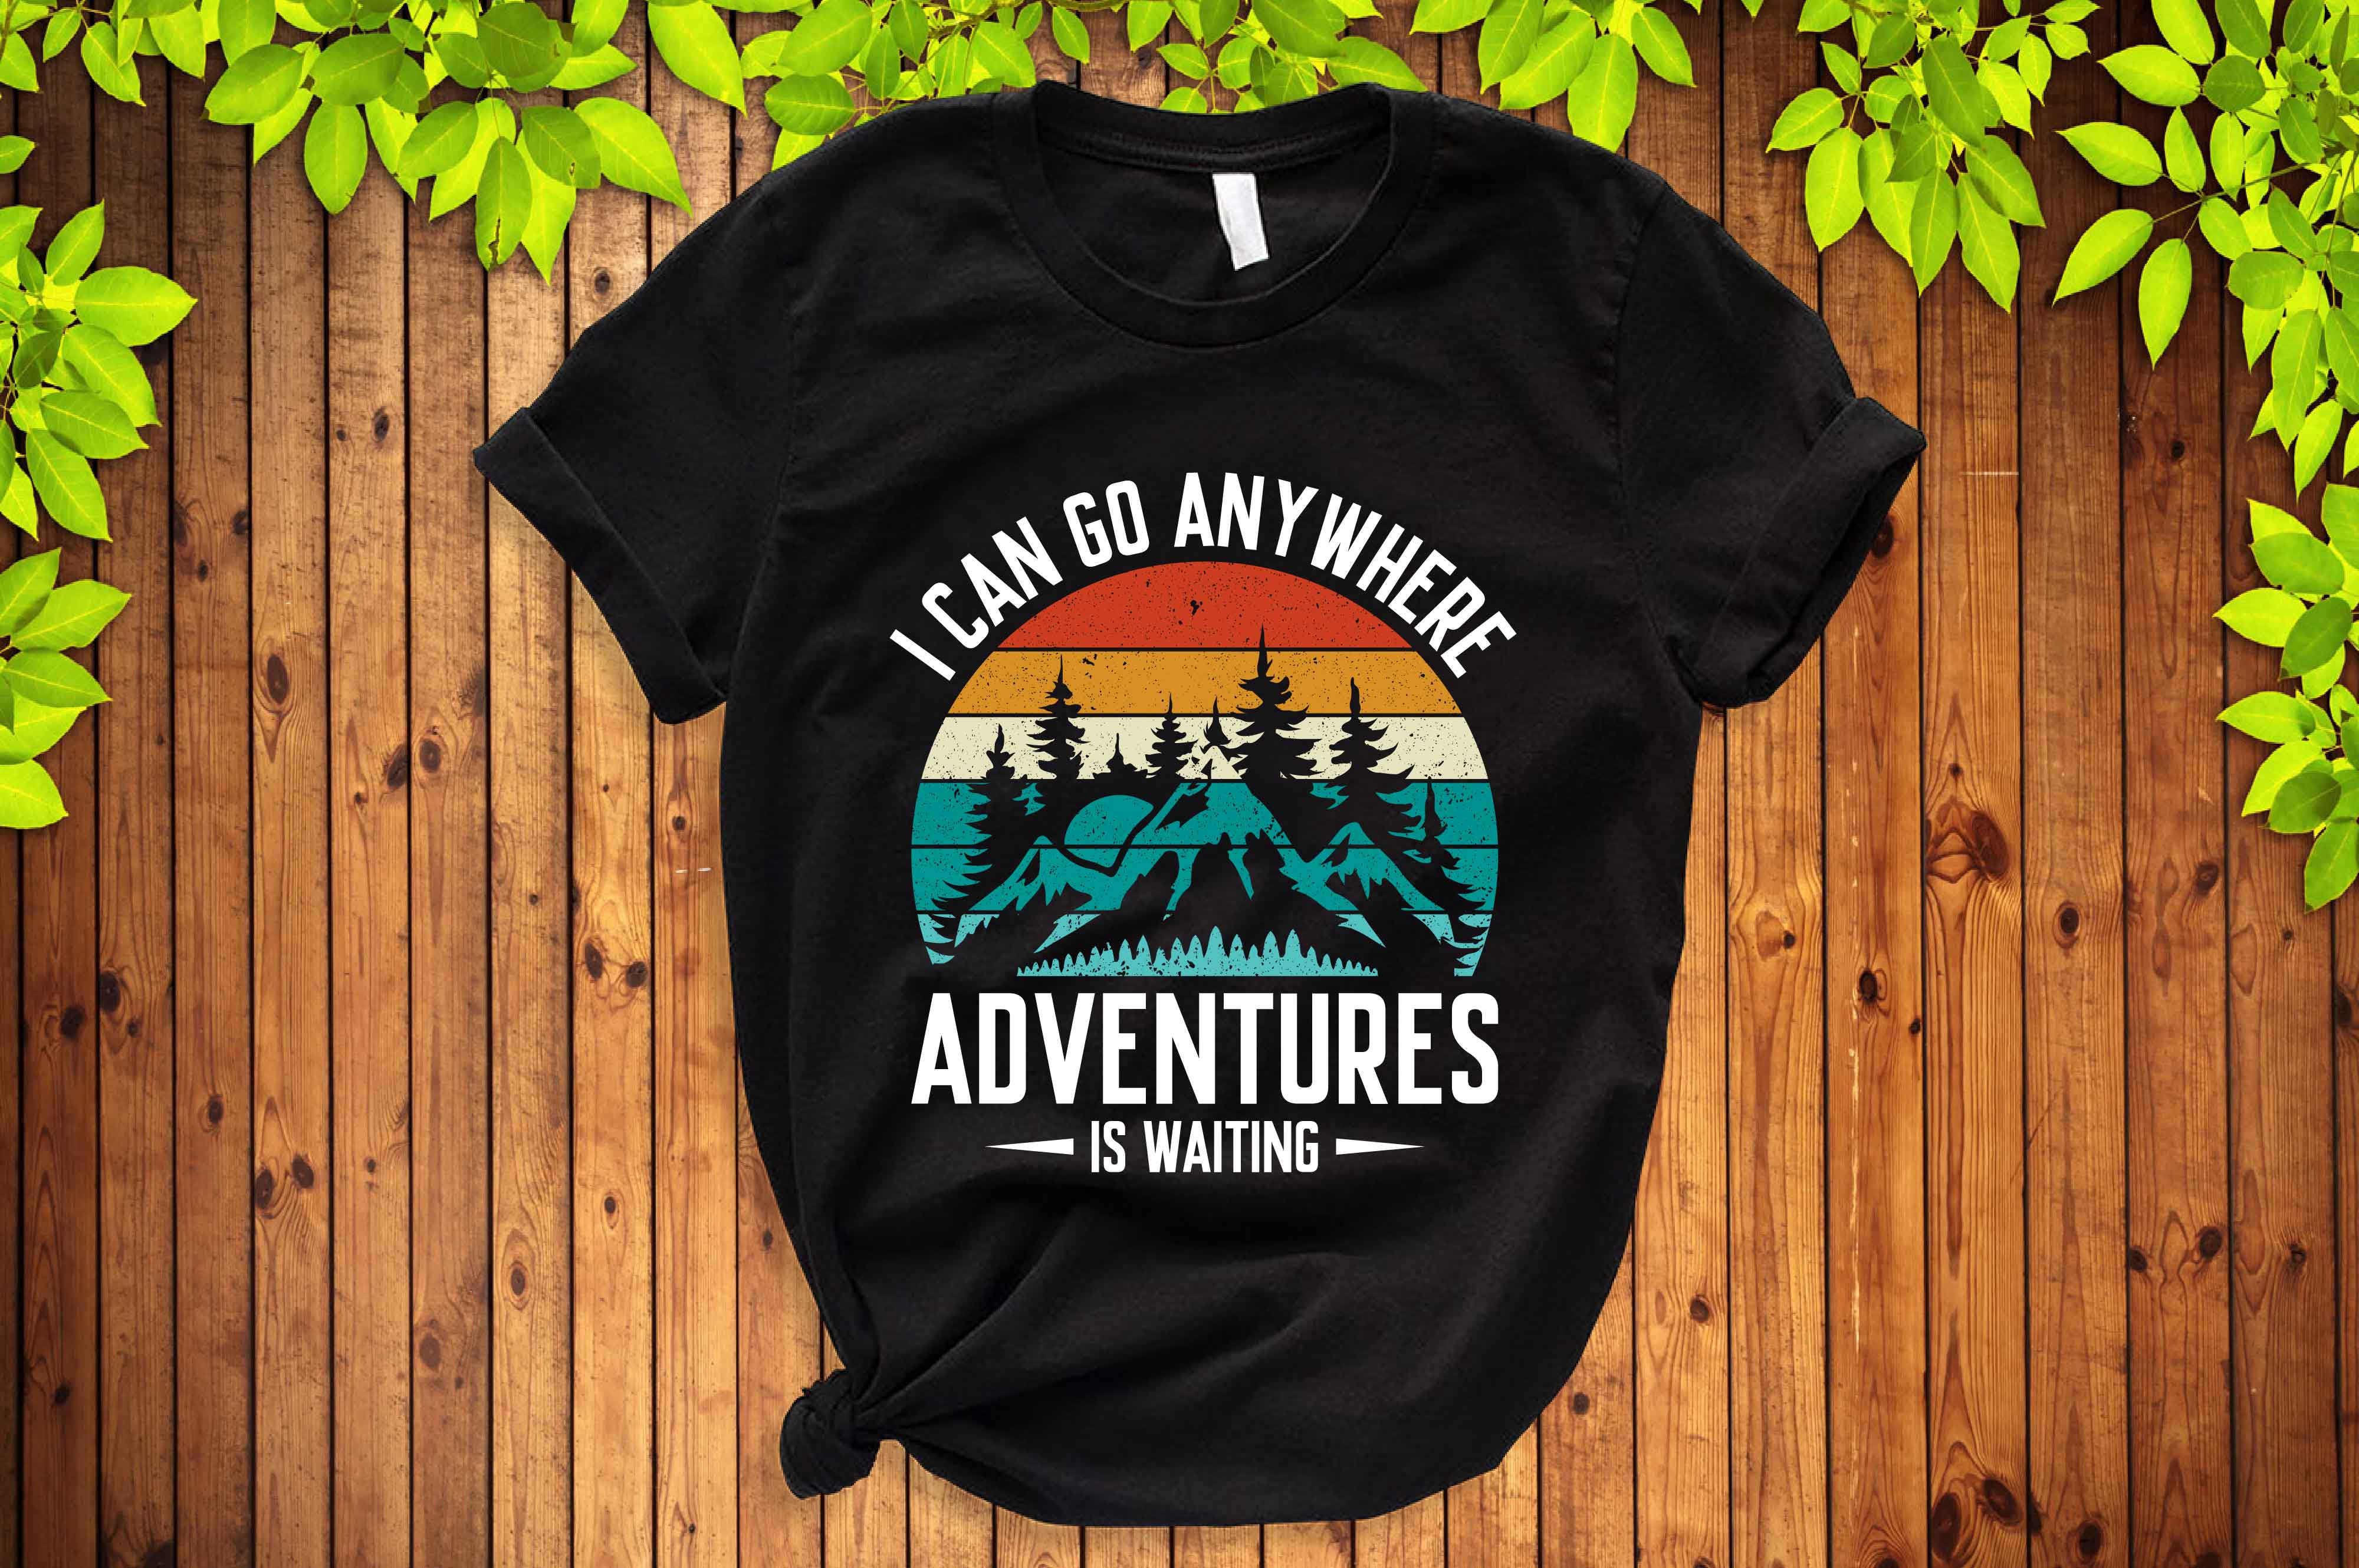 T - shirt that says i can go any where adventures is waiting.